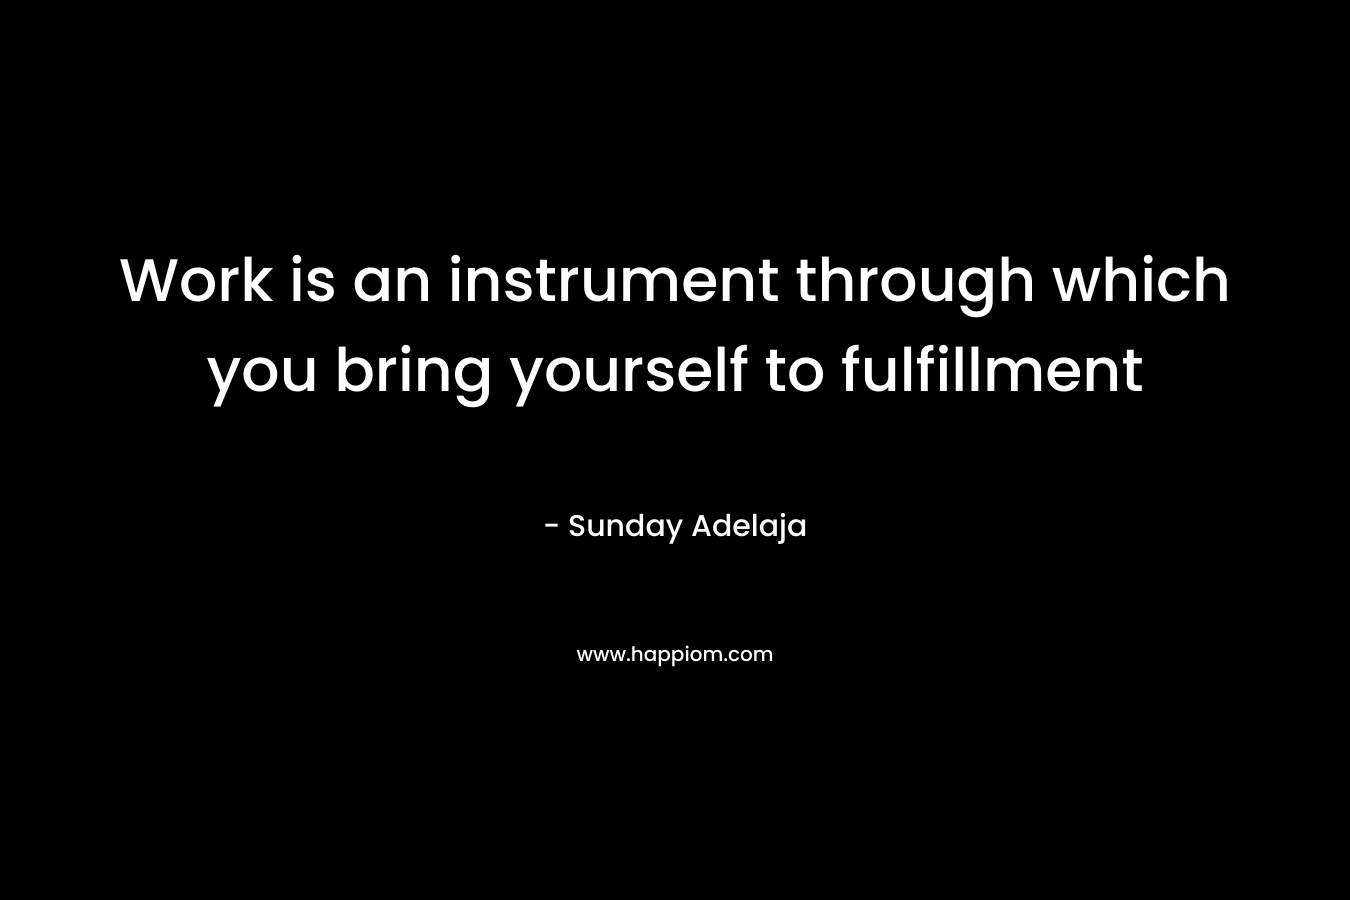 Work is an instrument through which you bring yourself to fulfillment